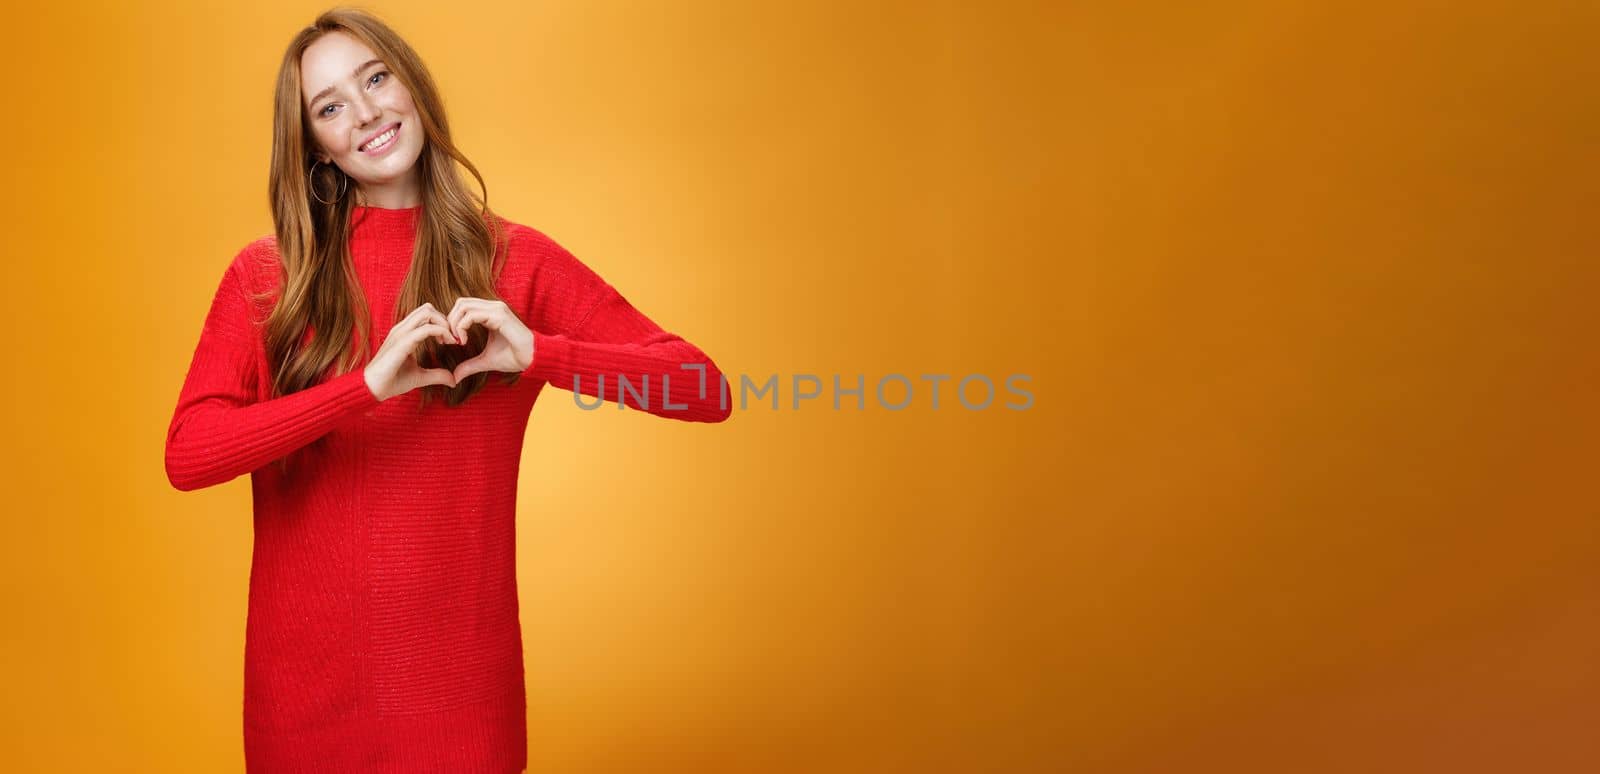 Lifestyle. Attractive confident and cute ginger girl with freckles in red knitted warm dress showing love gesture tilting head and smiling broadly at camera liking and adoring new outfit over orange background.